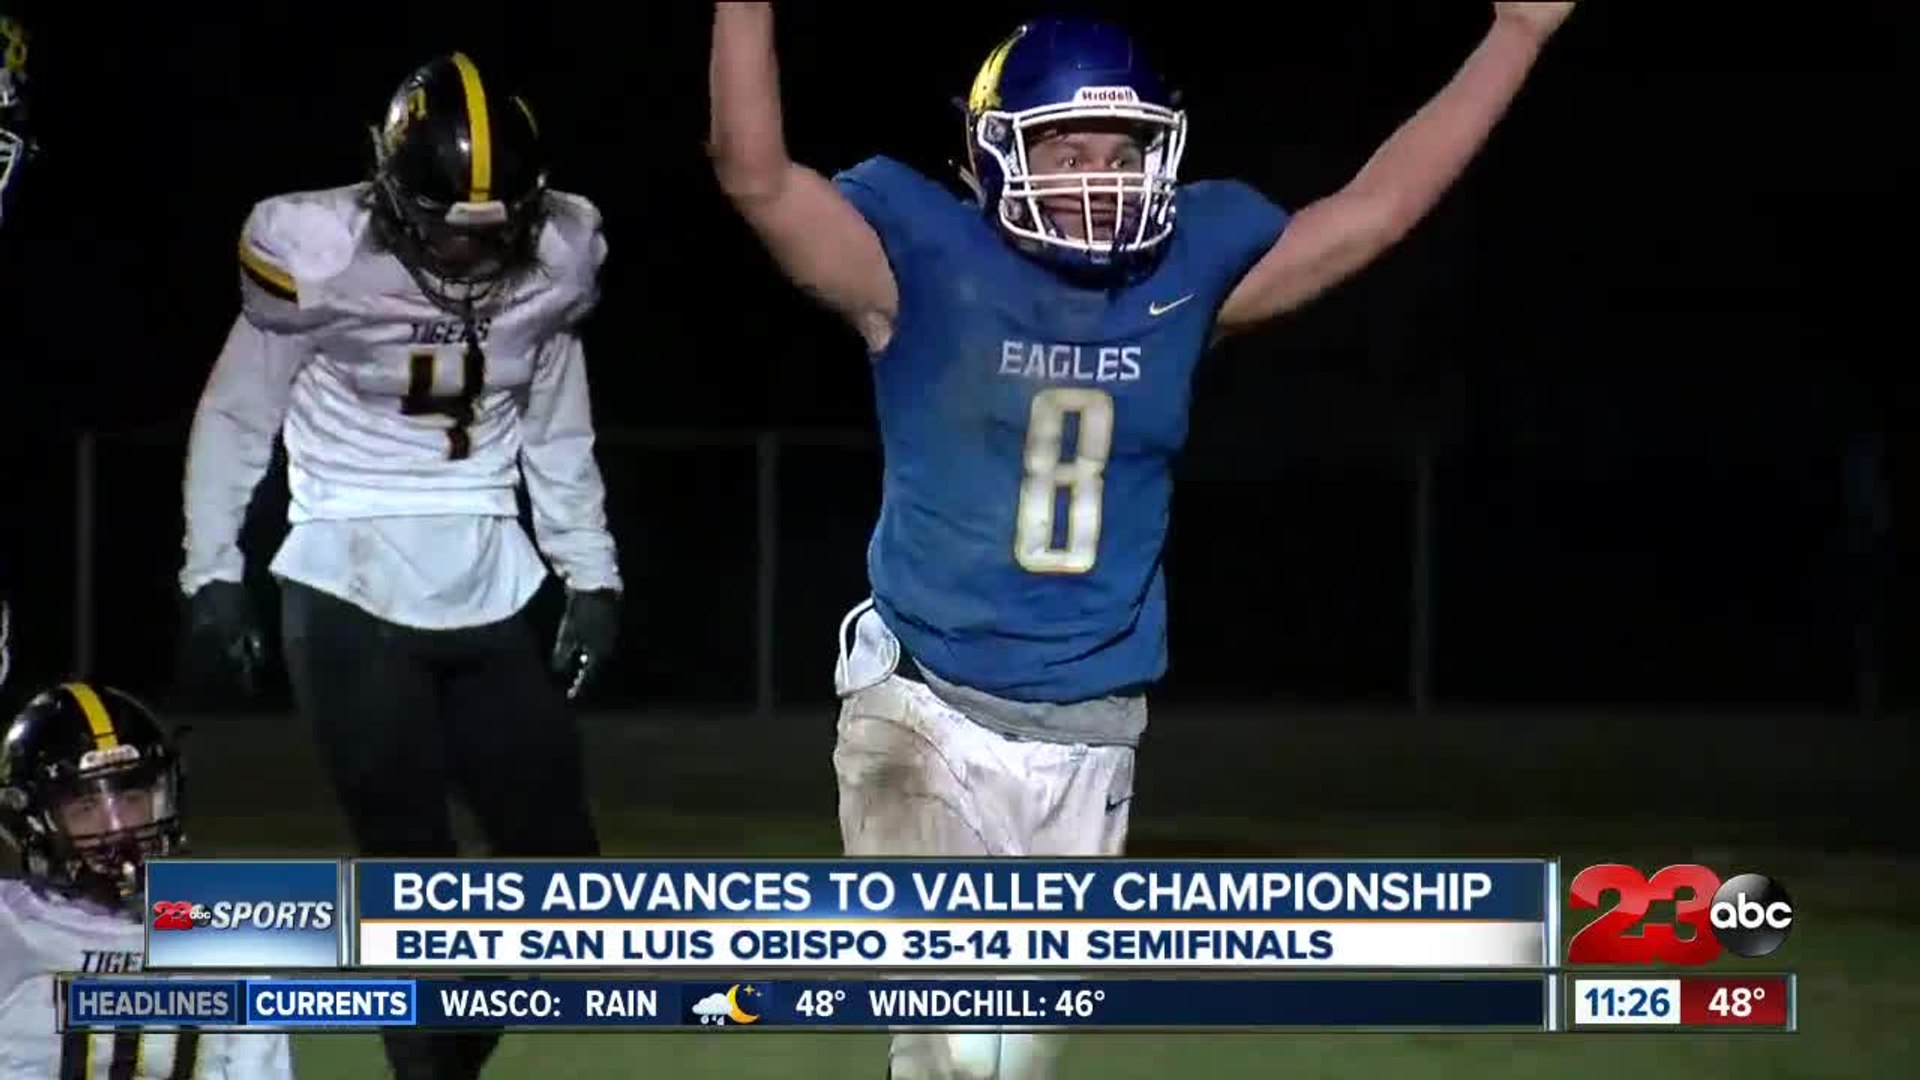 Bchs Moving On To Semifinals After Win Over San Luis Obispo